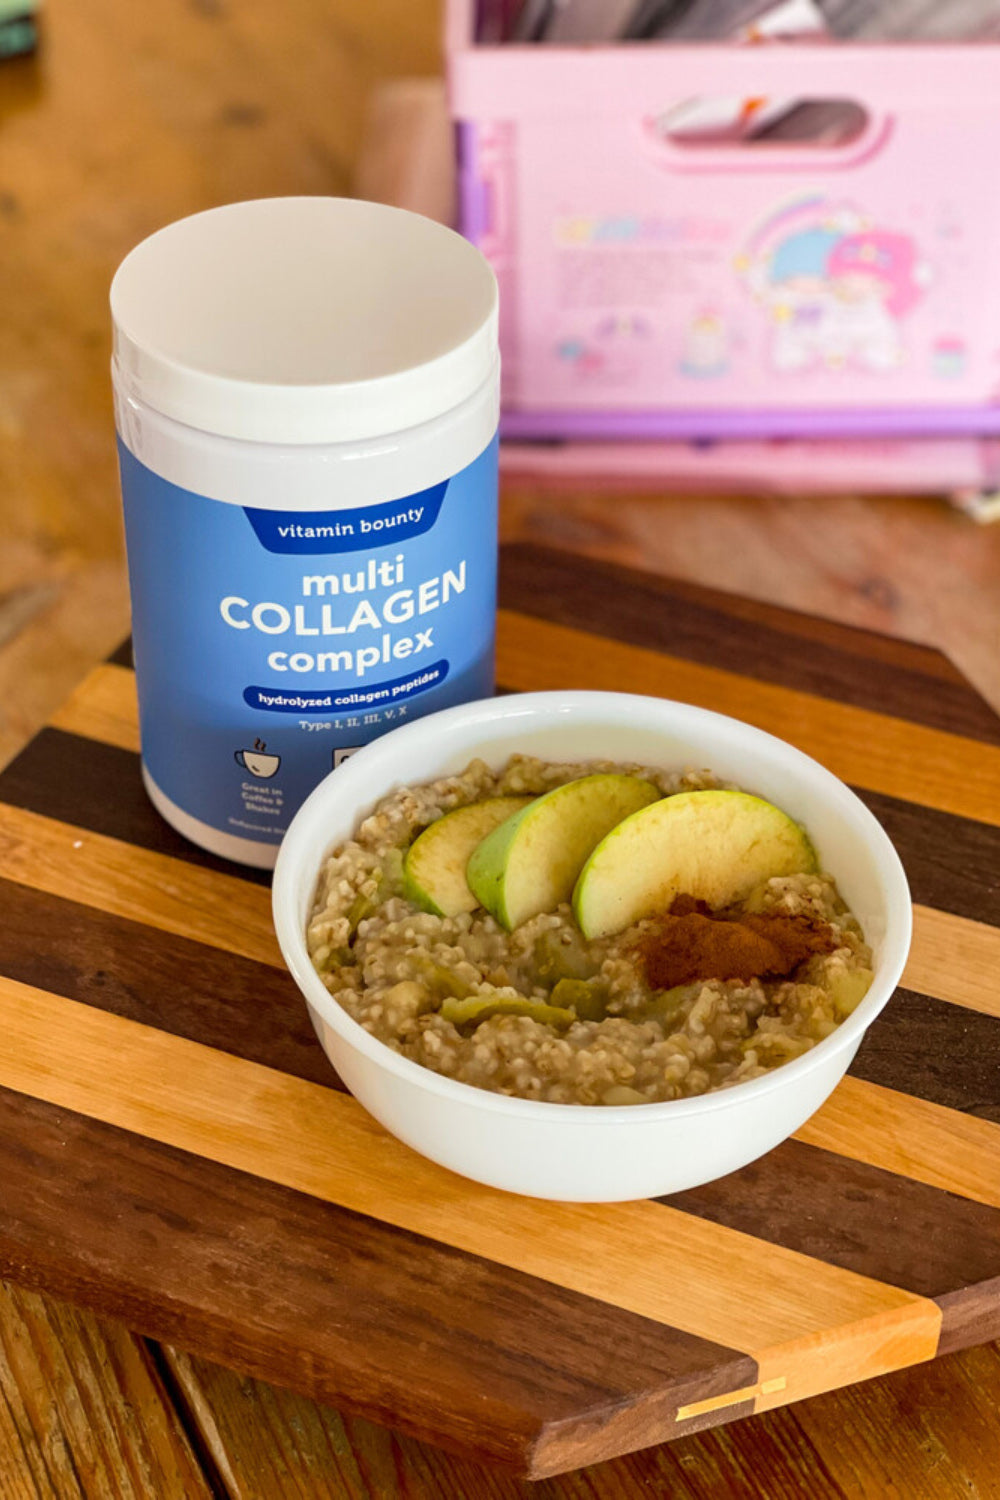 Oatmeal with apples and Vitamin Bounty Multi Collagen Complex